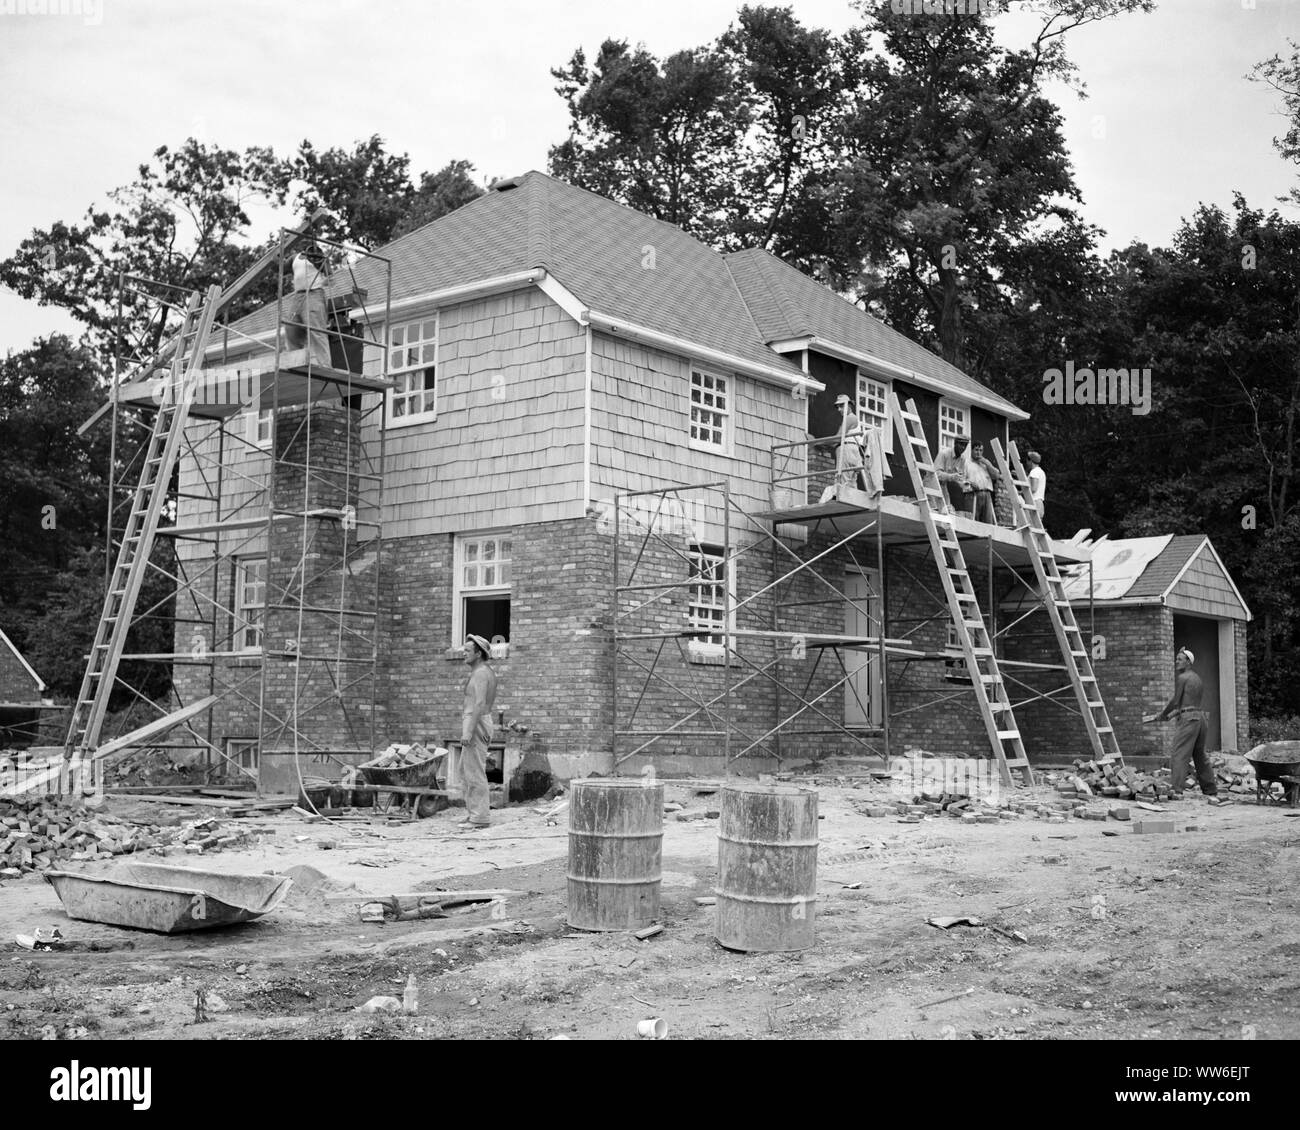 1940s 1950s HALF DOZEN ANONYMOUS WORKERS BUILDING LEVITTOWN SUBURBAN HOME $22,500 MODEL ROSLYN HEIGHTS LONG ISLAND NEW YORK USA - b3753 PRC001 HARS VISION SKILL DREAMS OCCUPATION SKILLS PROPERTY STRENGTH STRATEGY CUSTOMER SERVICE CHOICE EXTERIOR LOW ANGLE PROGRESS INNOVATION POSTWAR WORLD WAR II 1947 OCCUPATIONS REAL ESTATE LONG ISLAND CONCEPTUAL LEVITTOWN NEW YORK STRUCTURES IMAGINATION NORTH SHORE STYLISH WORLD WAR 2 EDIFICE ANONYMOUS HAMLET BOOM CREATIVITY HALF DOZEN IDEAS MID-ADULT MID-ADULT MAN SOLUTIONS BLACK AND WHITE OLD FASHIONED Stock Photo